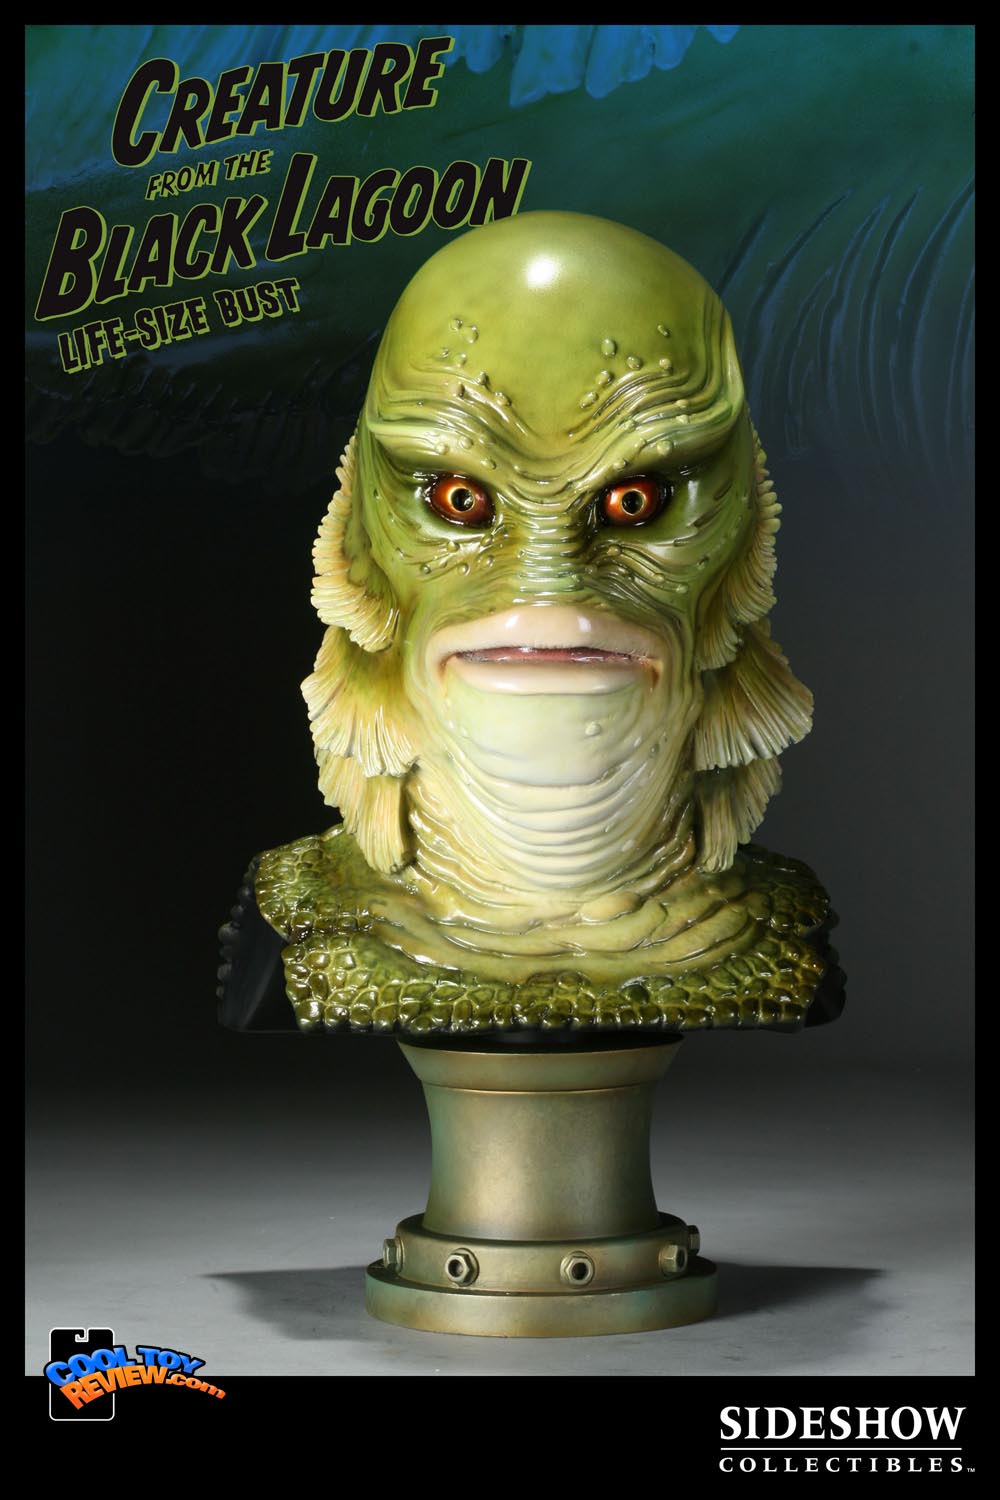 The Creature From The Black Lagoon bust by Sideshow Collectibles